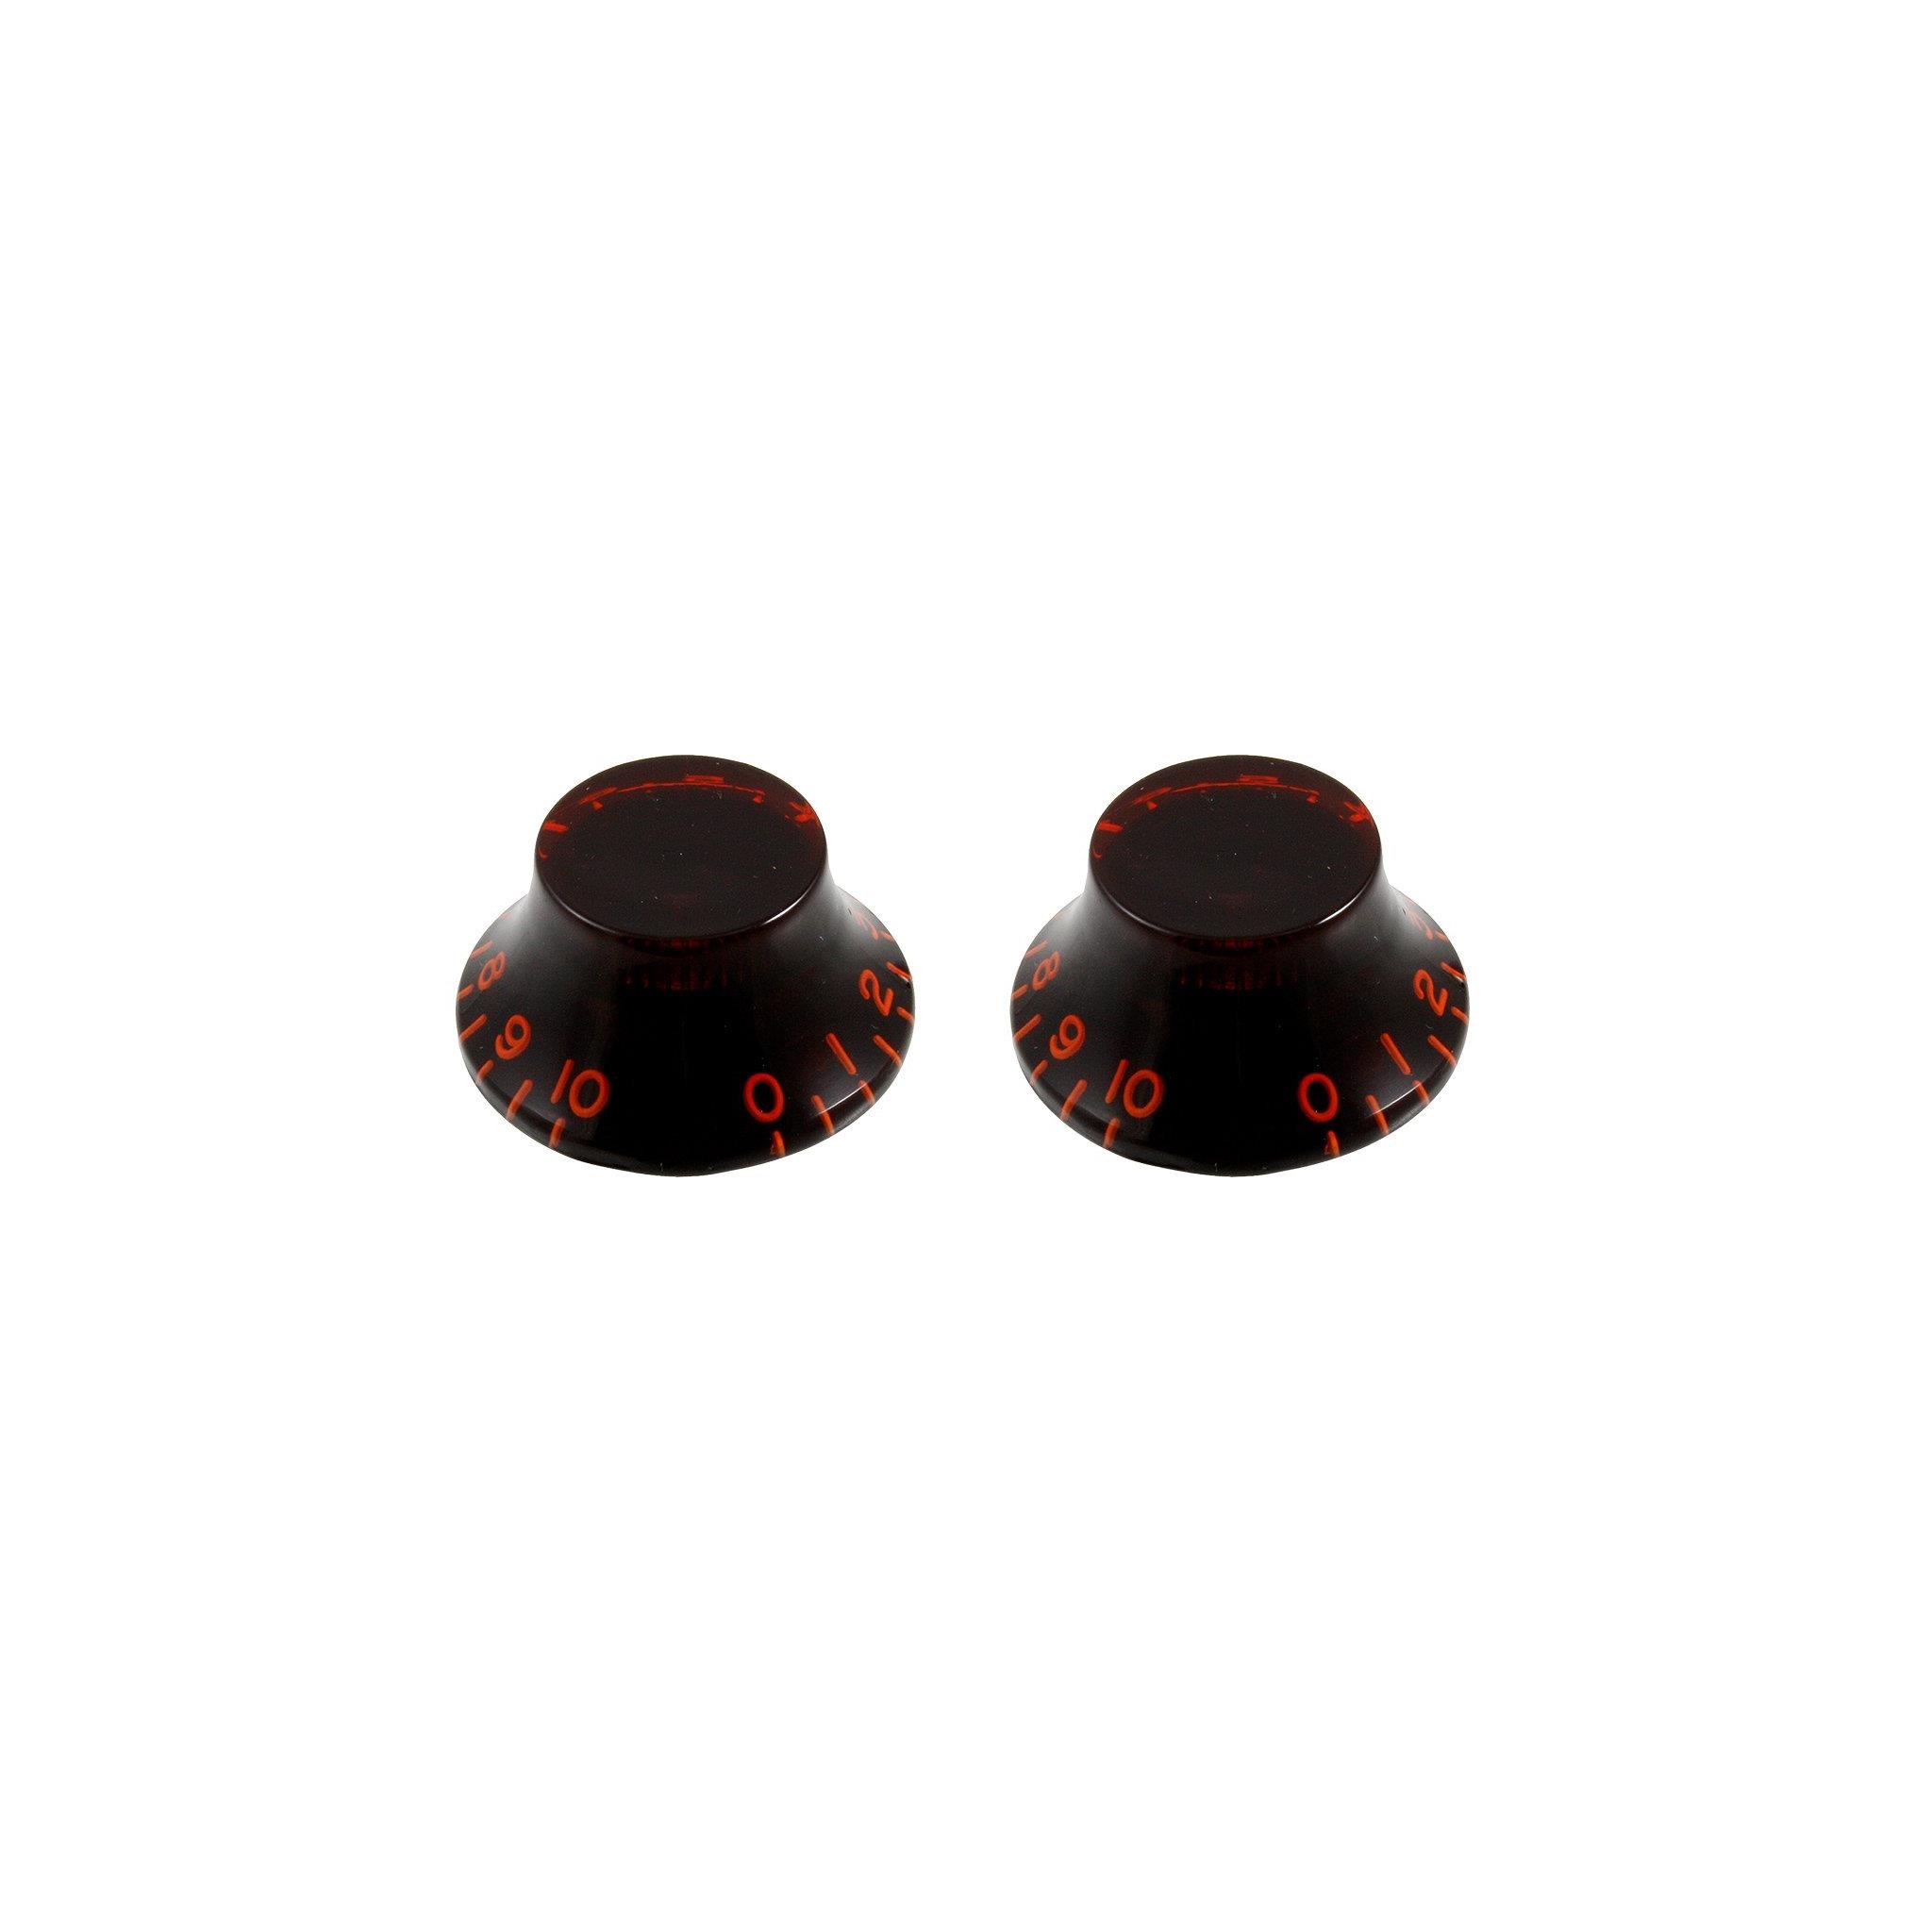 All Parts Vintage Bell Knobs Red Tint Set 2